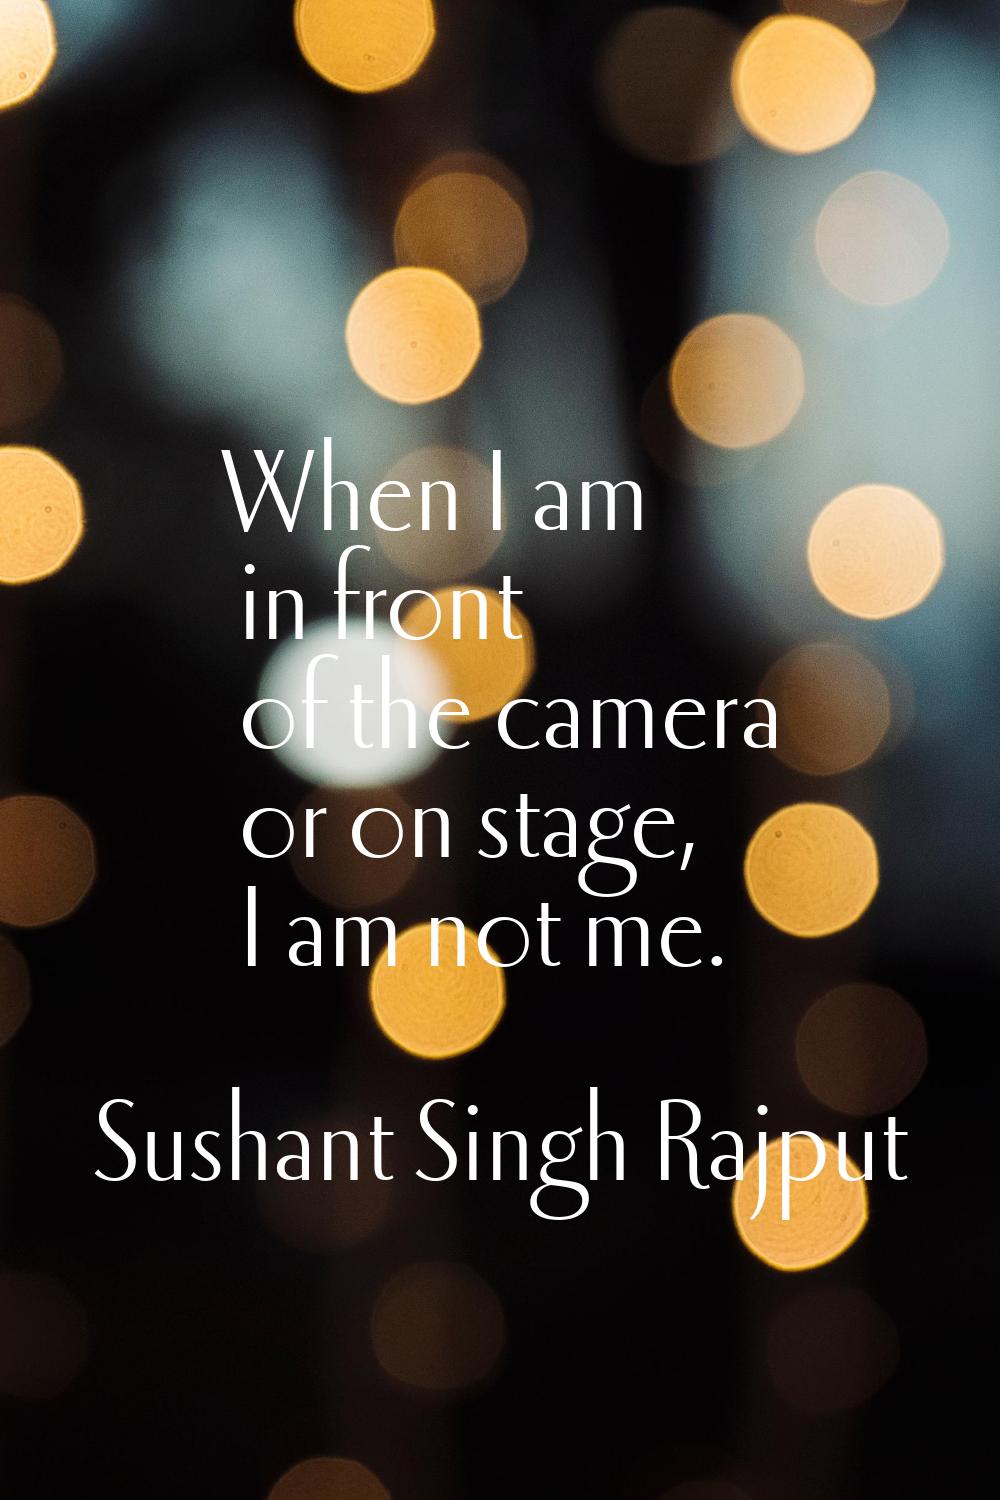 When I am in front of the camera or on stage, I am not me.